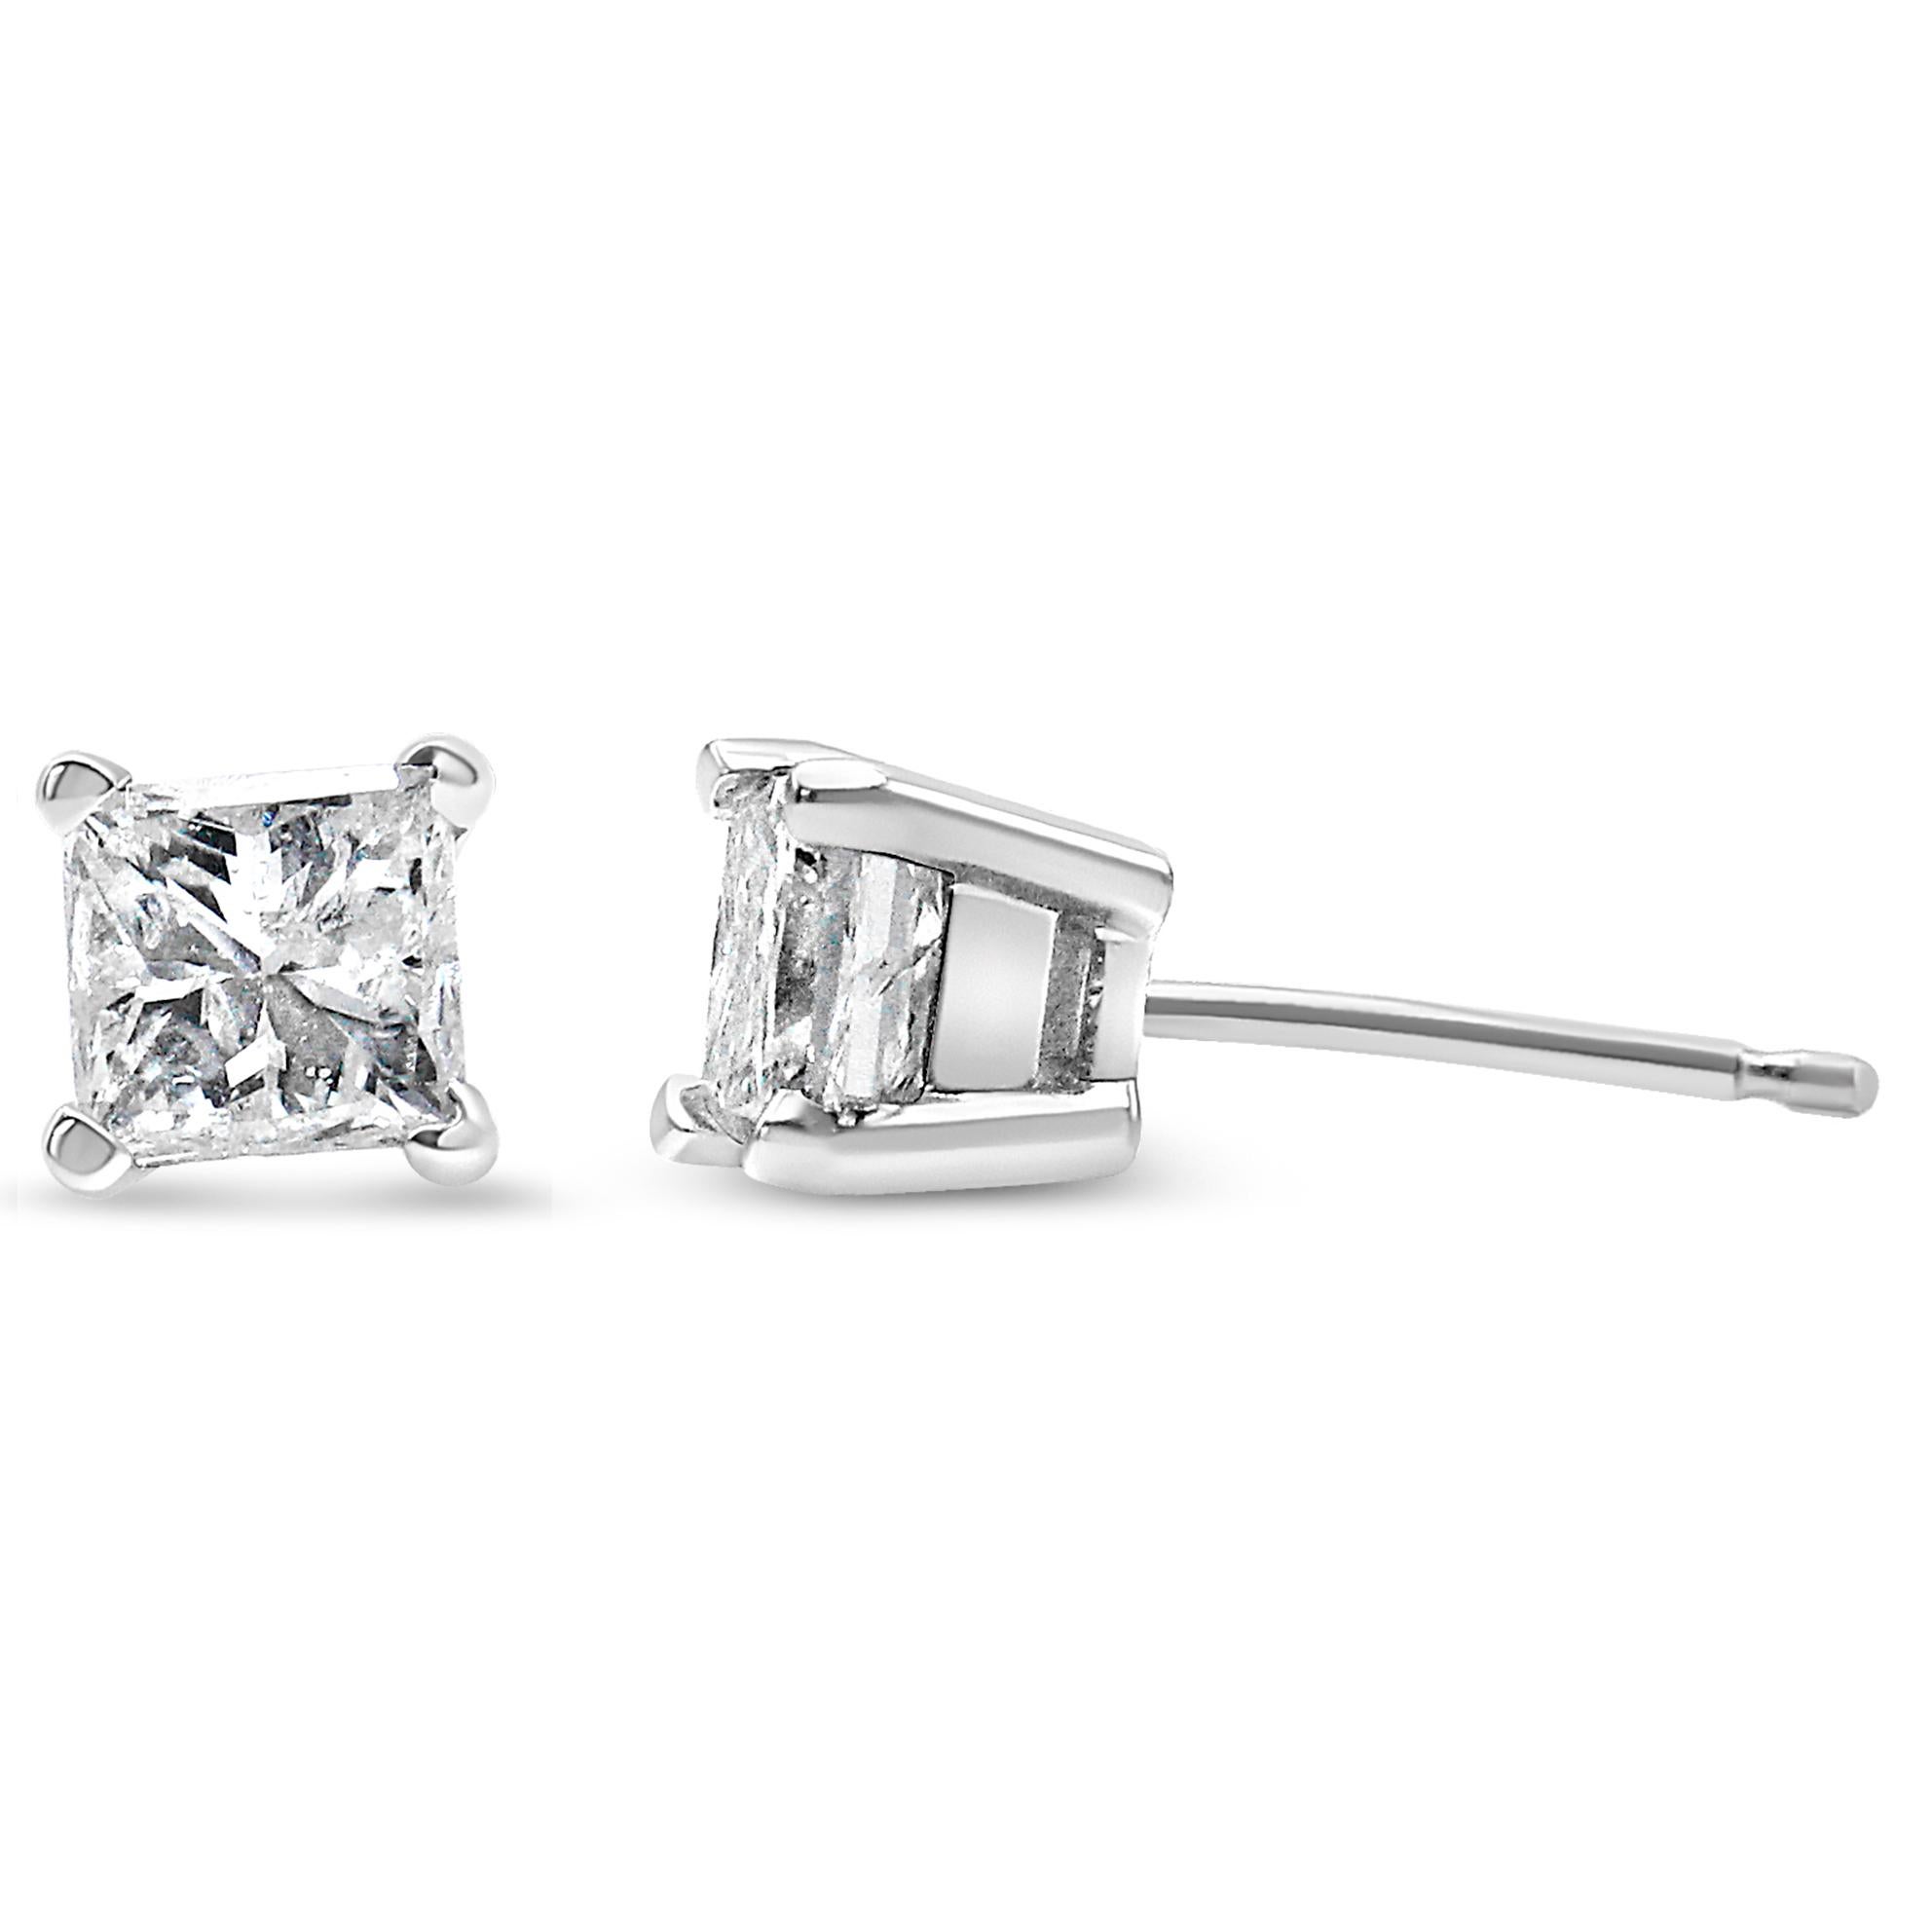 Contemporary AGS Certified 1.0 Carat Square Diamond Solitaire Stud Earrings in 14K White Gold For Sale